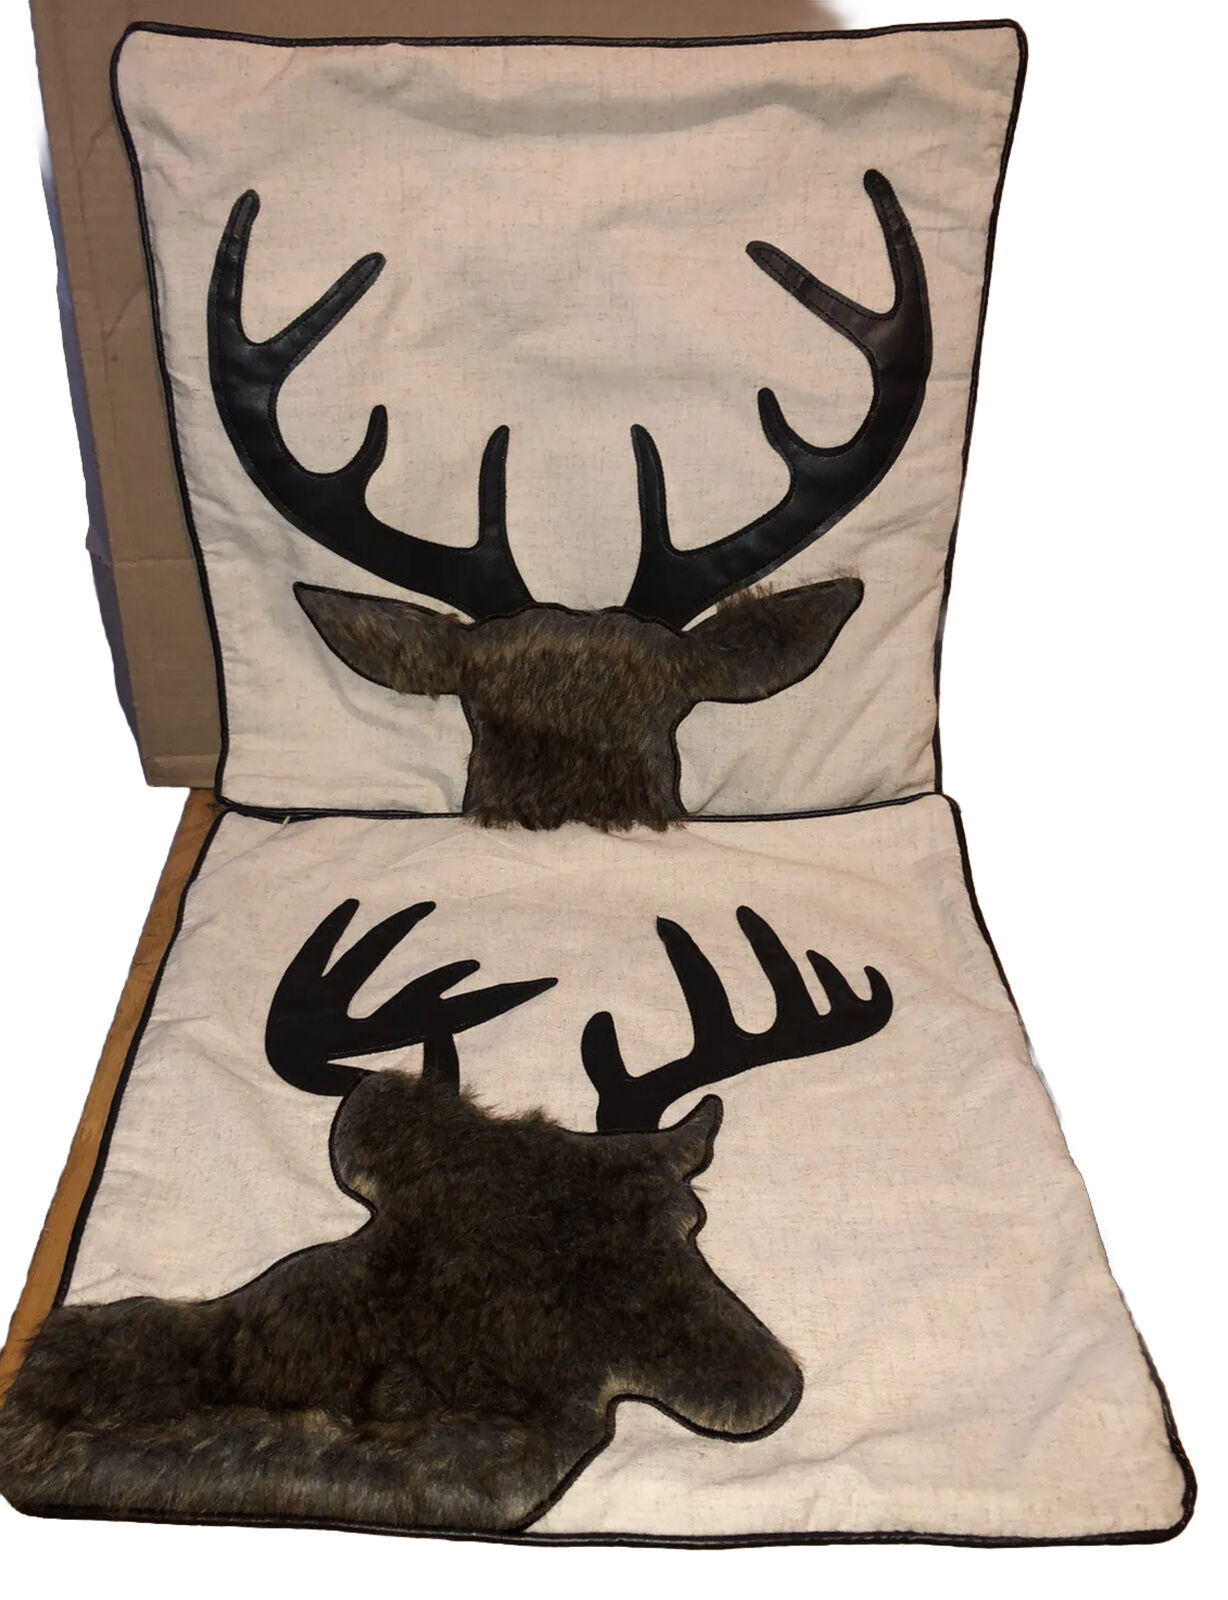 Pair Zip Pillow￼ Covers With Fur Deer 17” x 17”￼ Home Decor